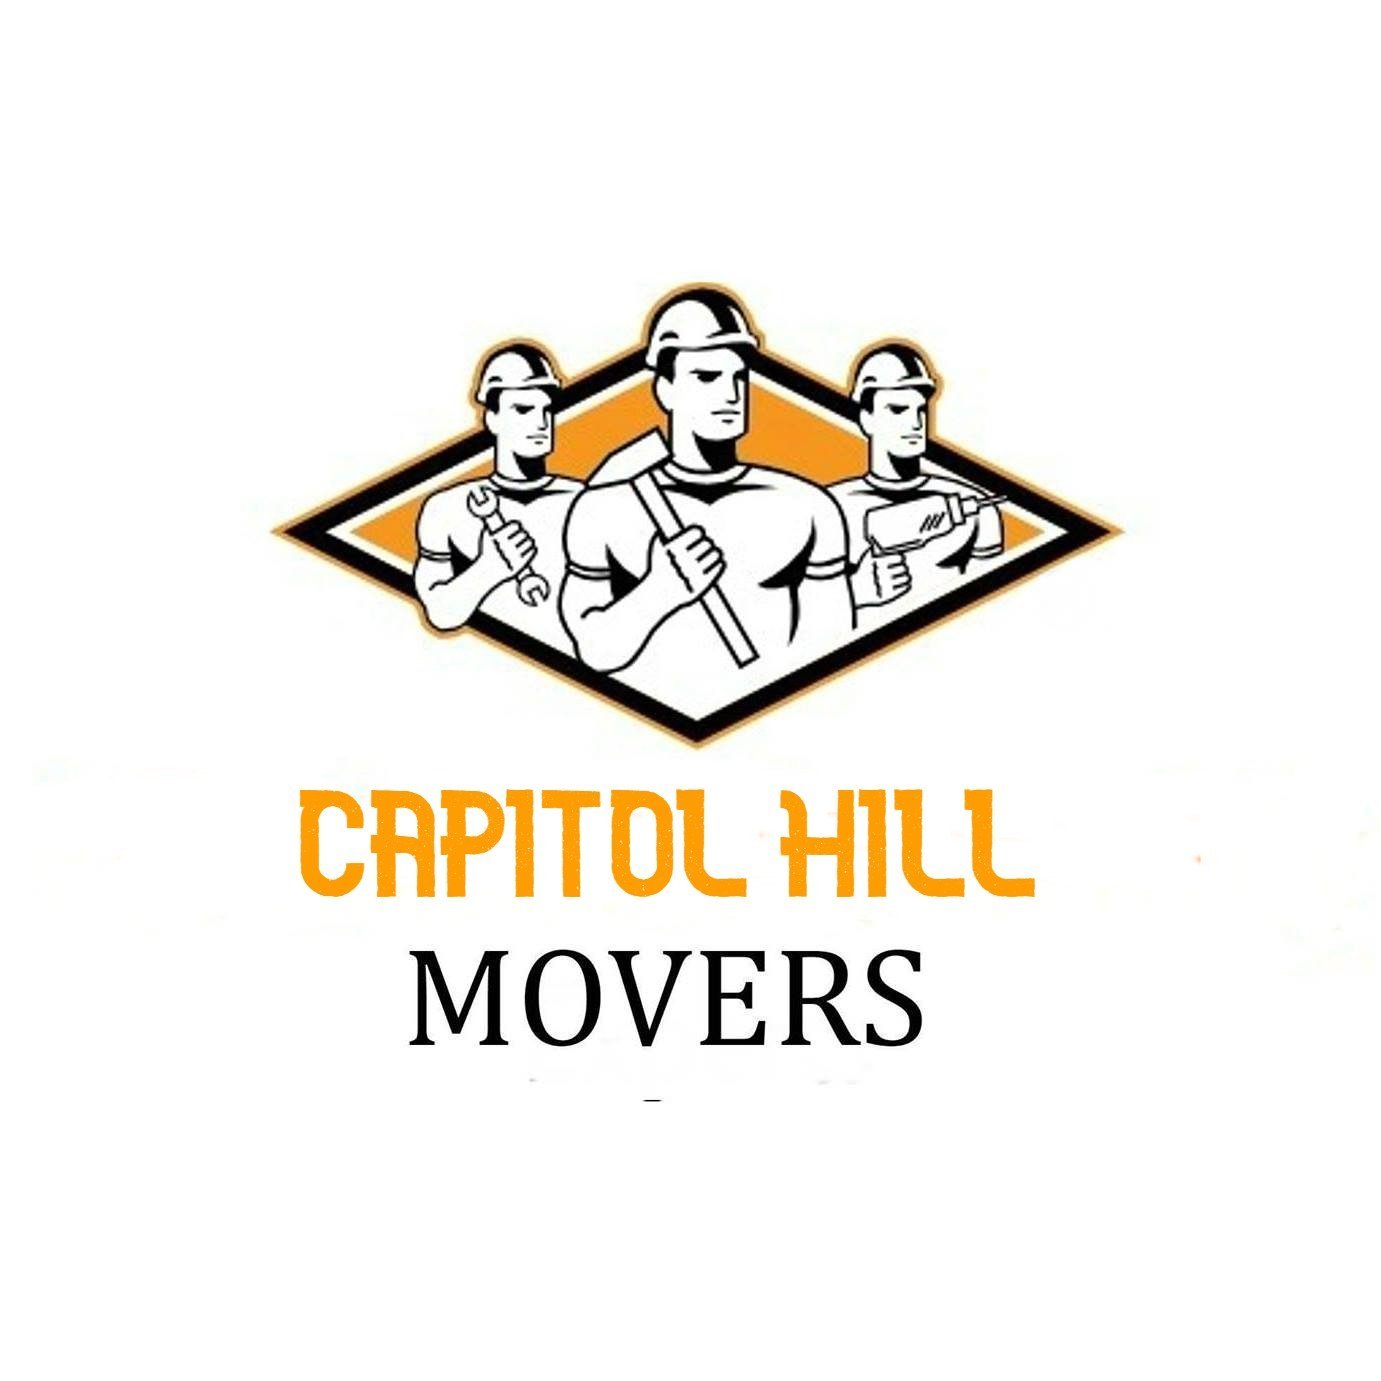 Downtown DC Movers